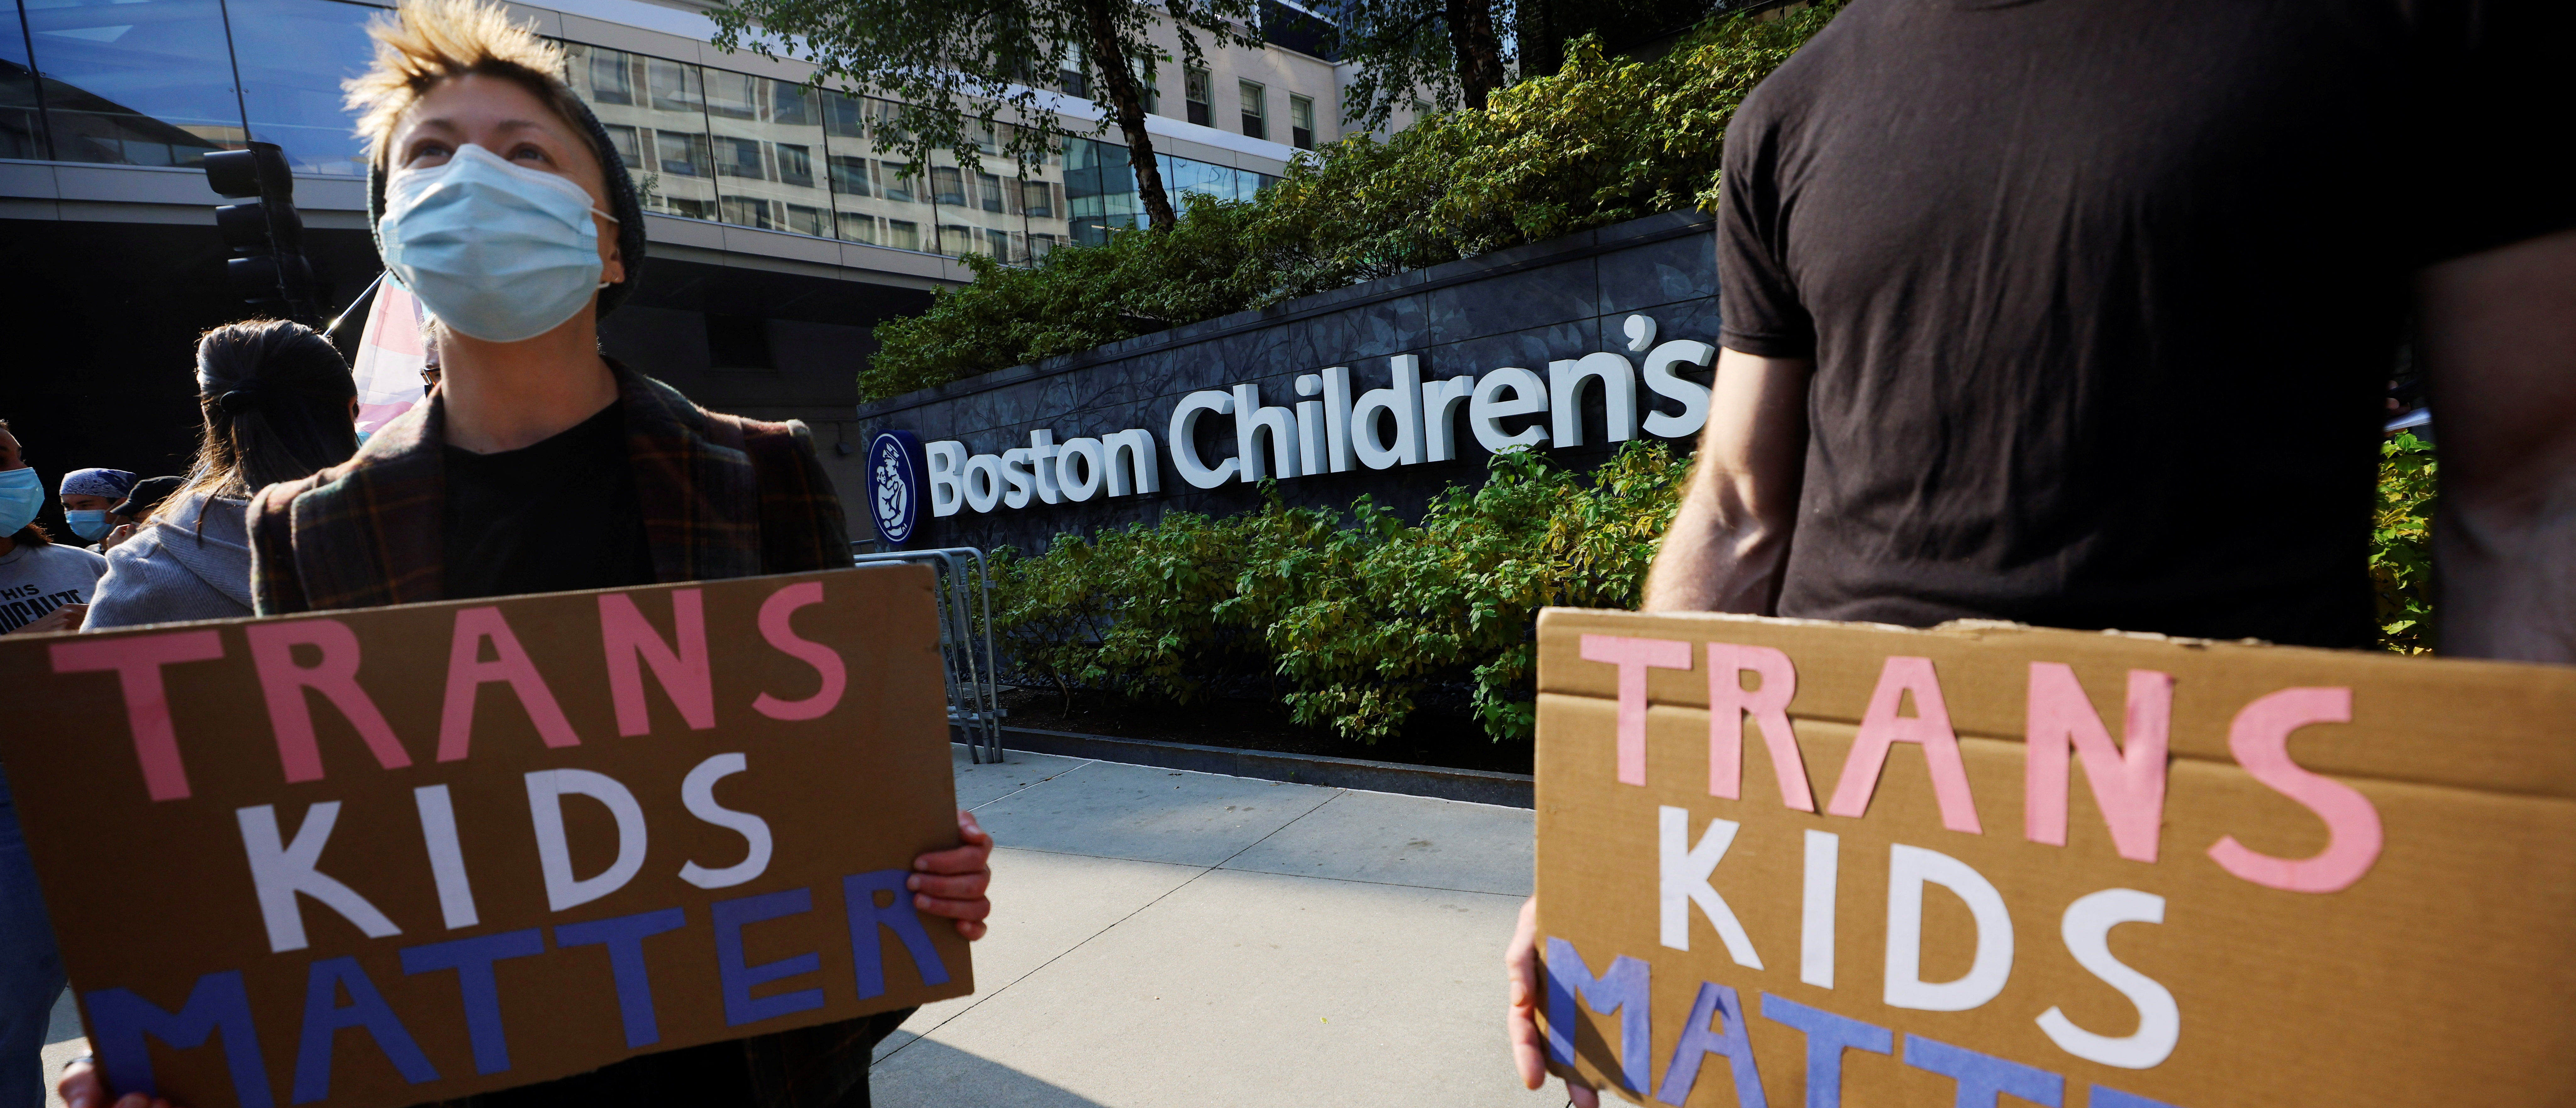 Counter-protestors gather to demonstrate against an appearance by "Billboard Chris", who opposes medical treatments for transgender youth, outside Children's Hospital in Boston, Massachusetts, U.S., September 18, 2022. REUTERS/Brian Snyder